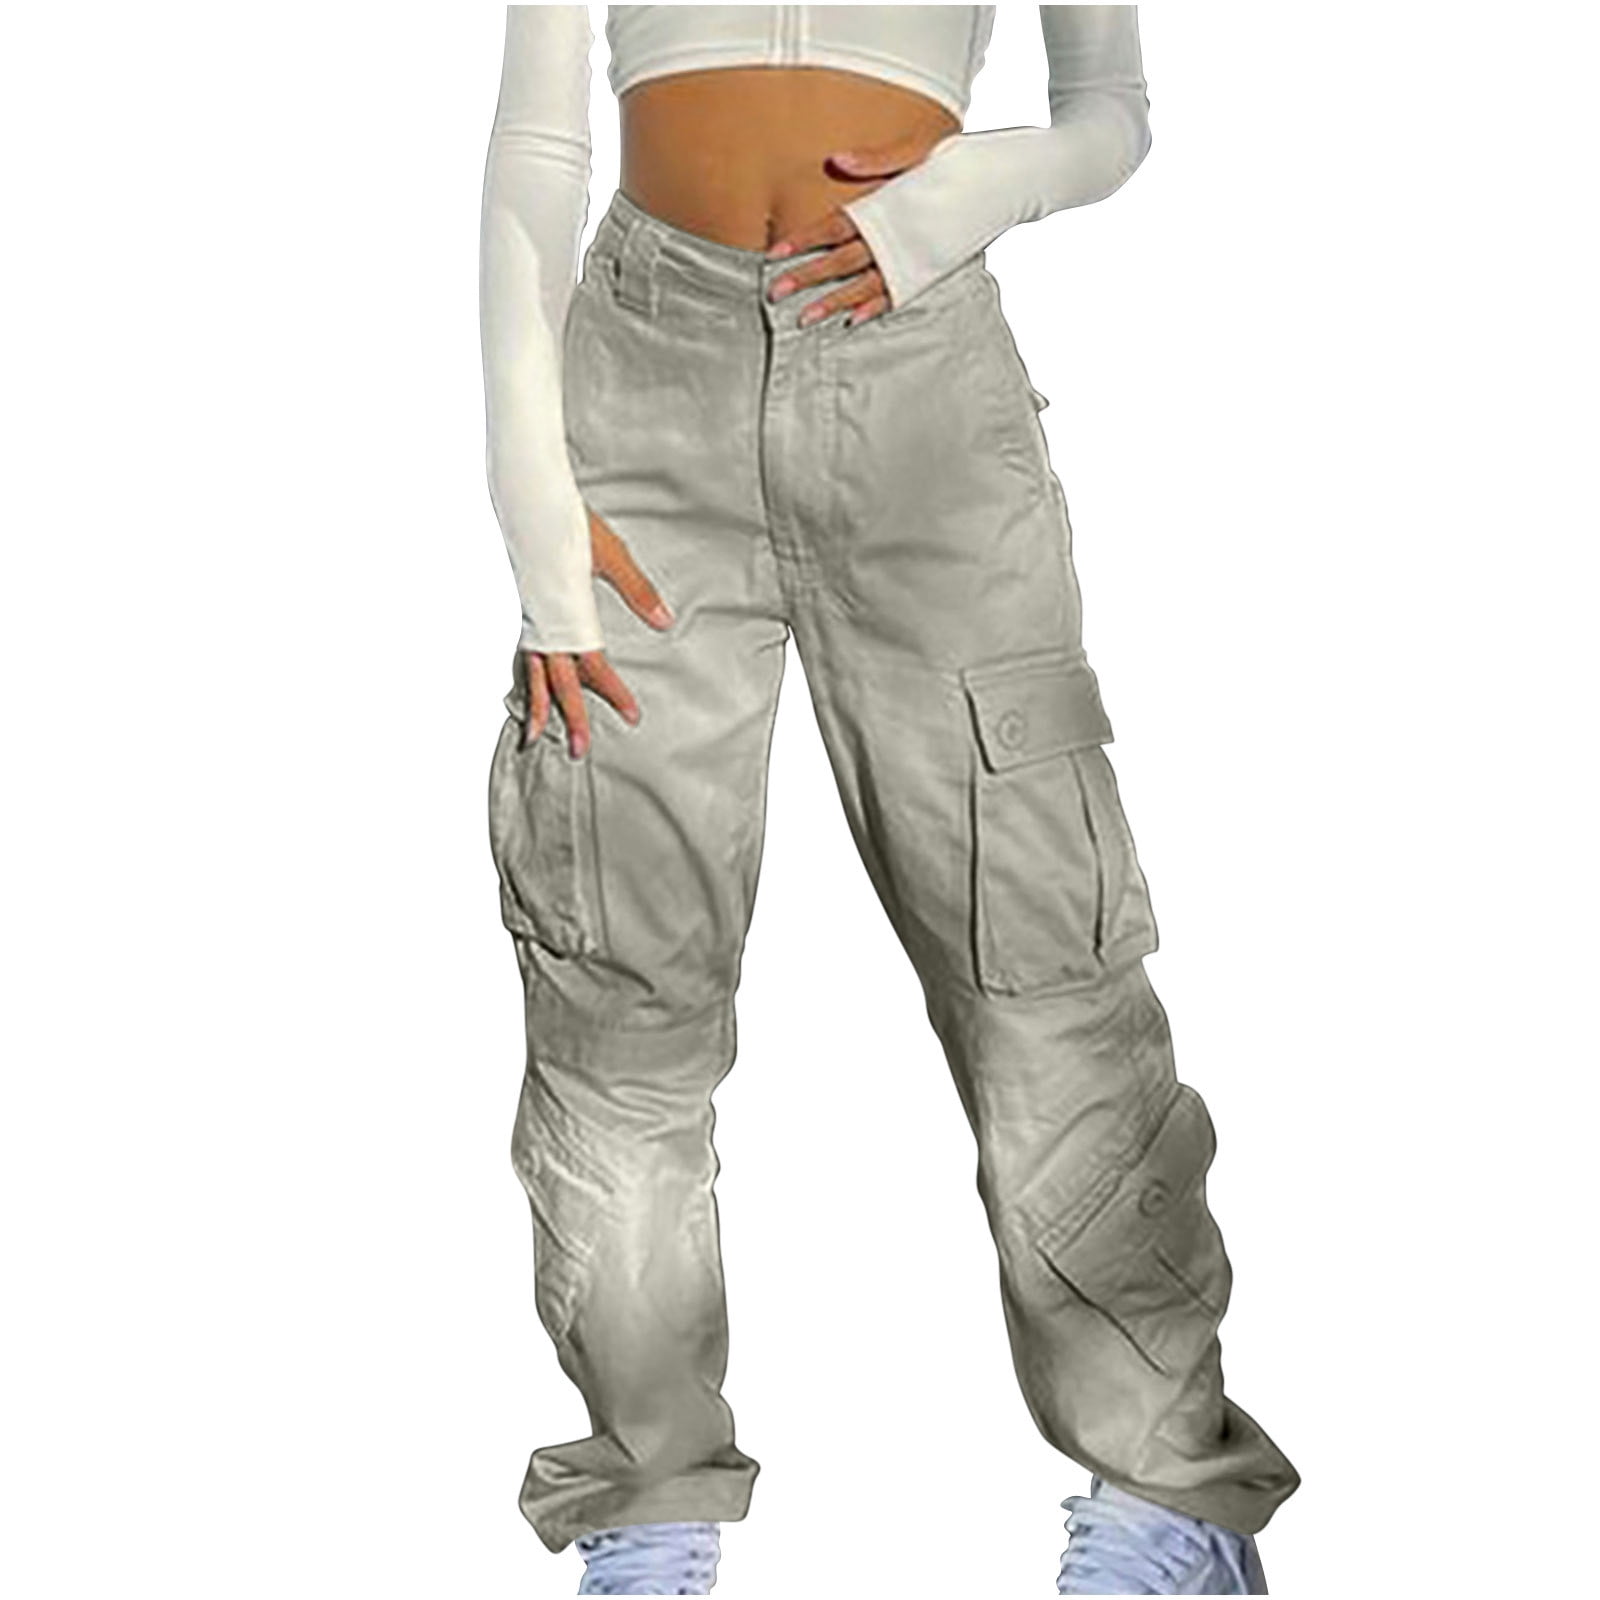 Clearance Under $10 ! BVnarty Cargo Pants for Women Solid Color Street  Style Overalls Drawstring Elastic Low Waist Sports Fashion Fall Winter Long  Trousers Comfy Lounge Casual Pocket Khaki S 